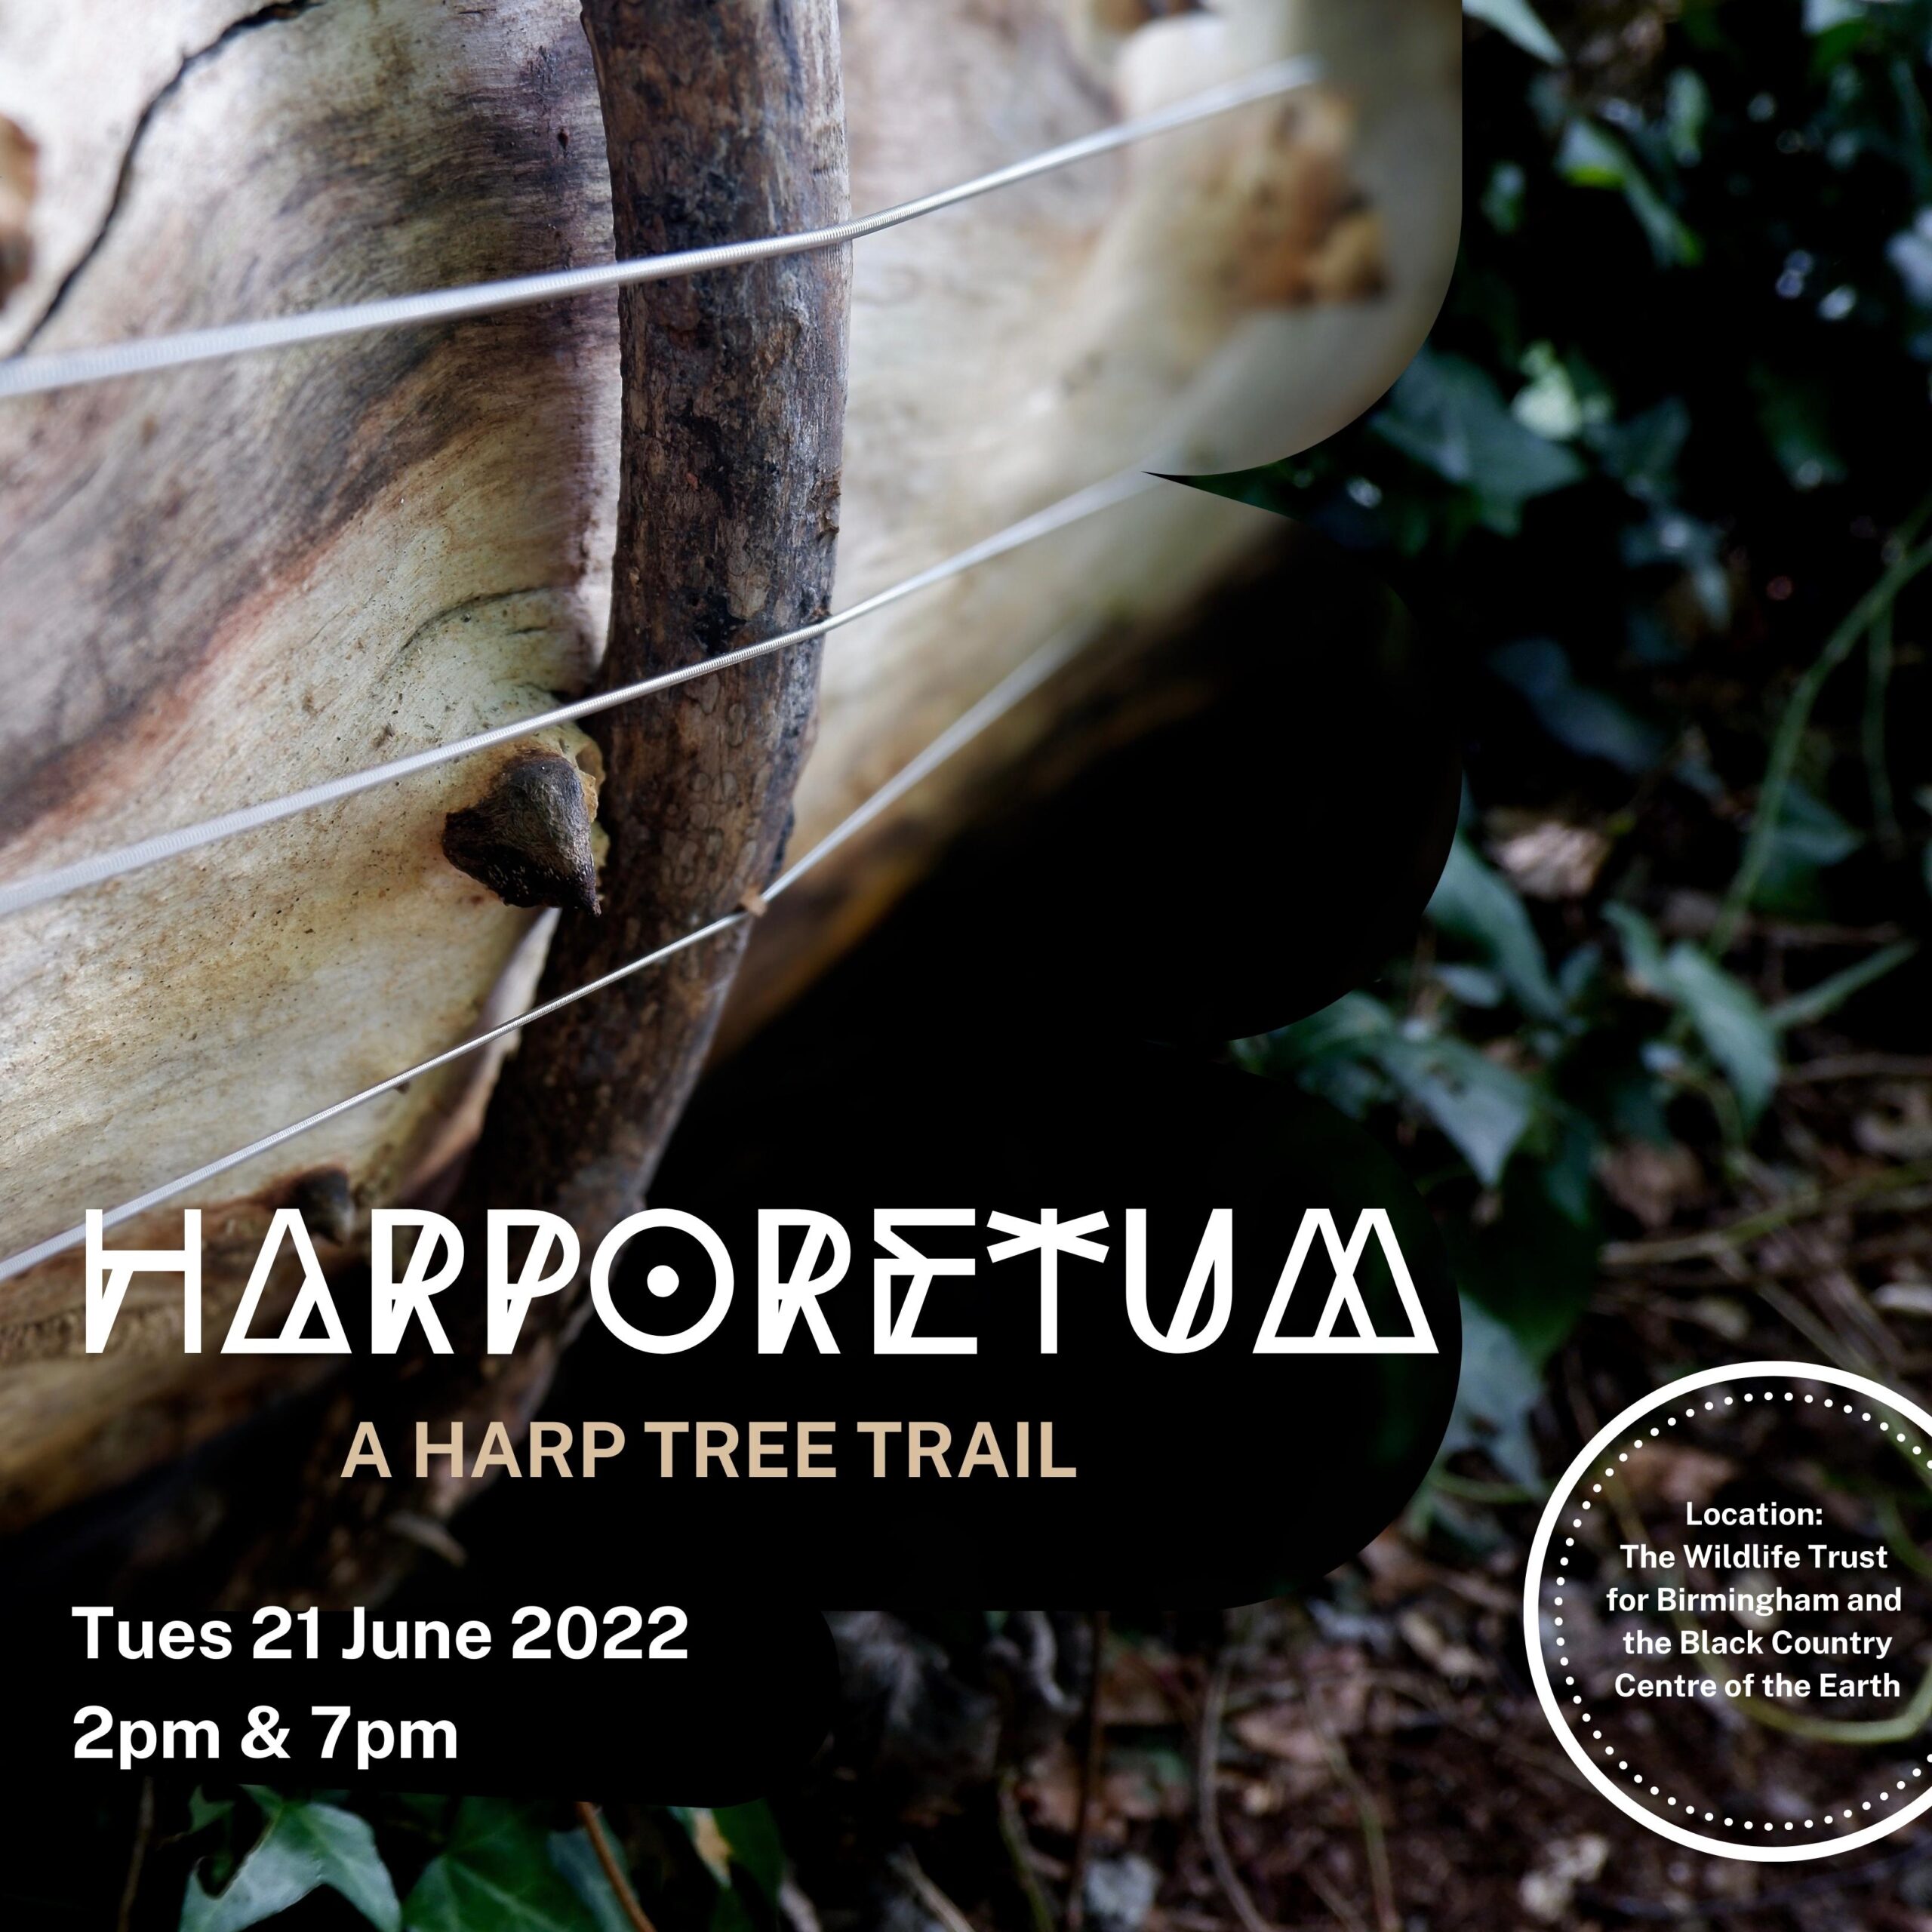 A poster with a photograph background of harp strings on a log surrounded by ivy. There is texts reading Harporetum, a harp tree trail, Tuesday 21 June 2022, 2pm and 7pm. Location: The Wildlife Trust for Birmingham and the Black Country Centre of the Earth